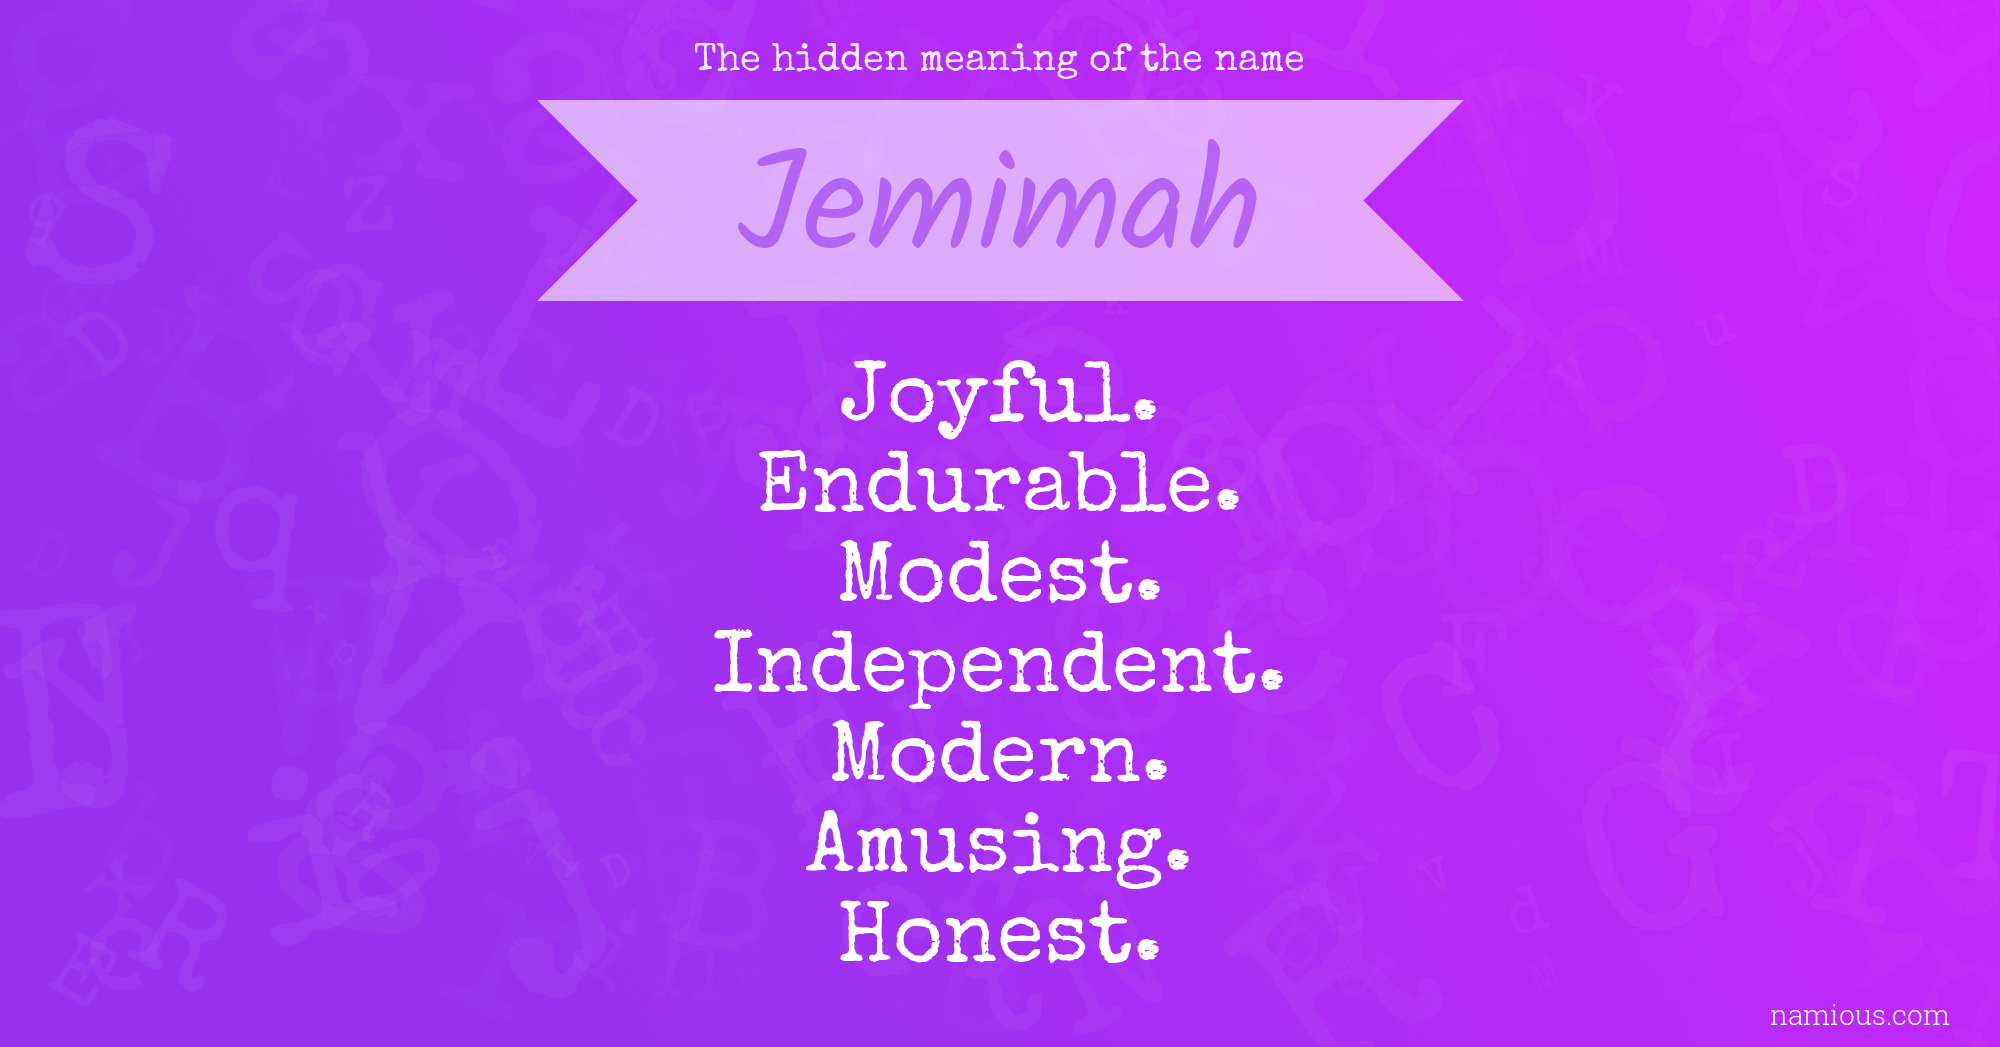 The Hidden Meaning Of The Name Jemimah | Namious